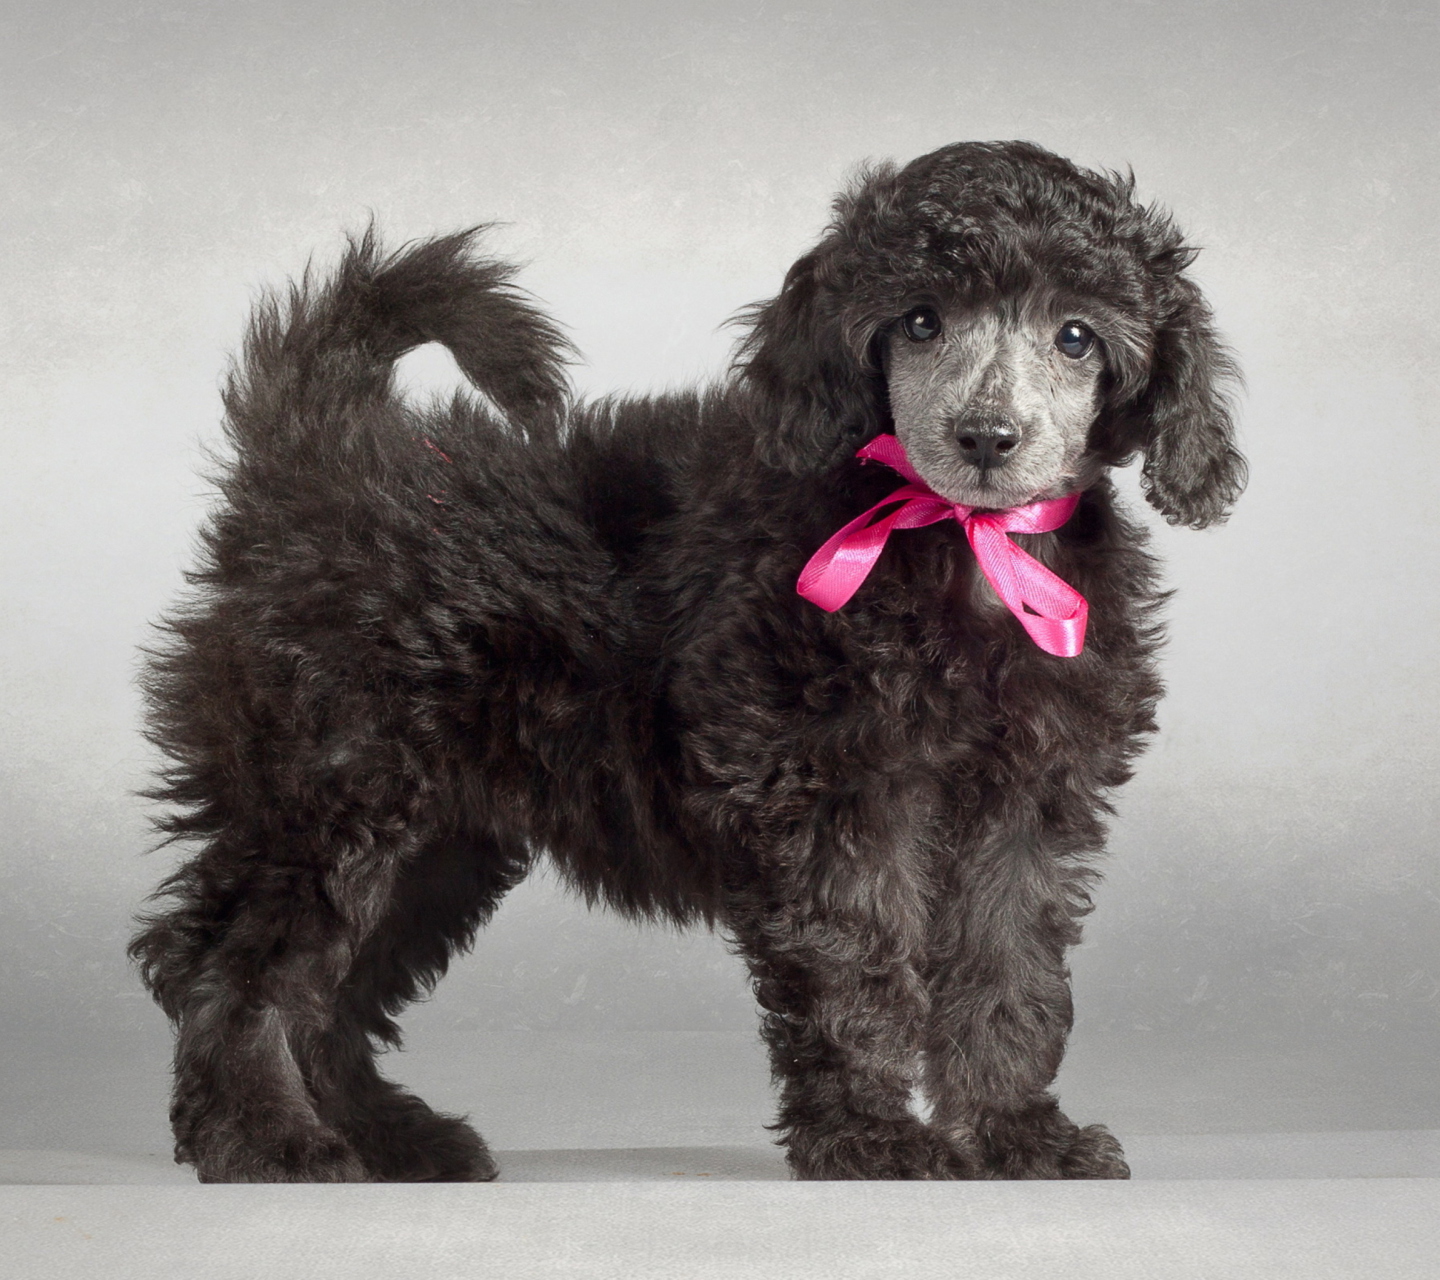 Funny Puppy With Pink Bow wallpaper 1440x1280